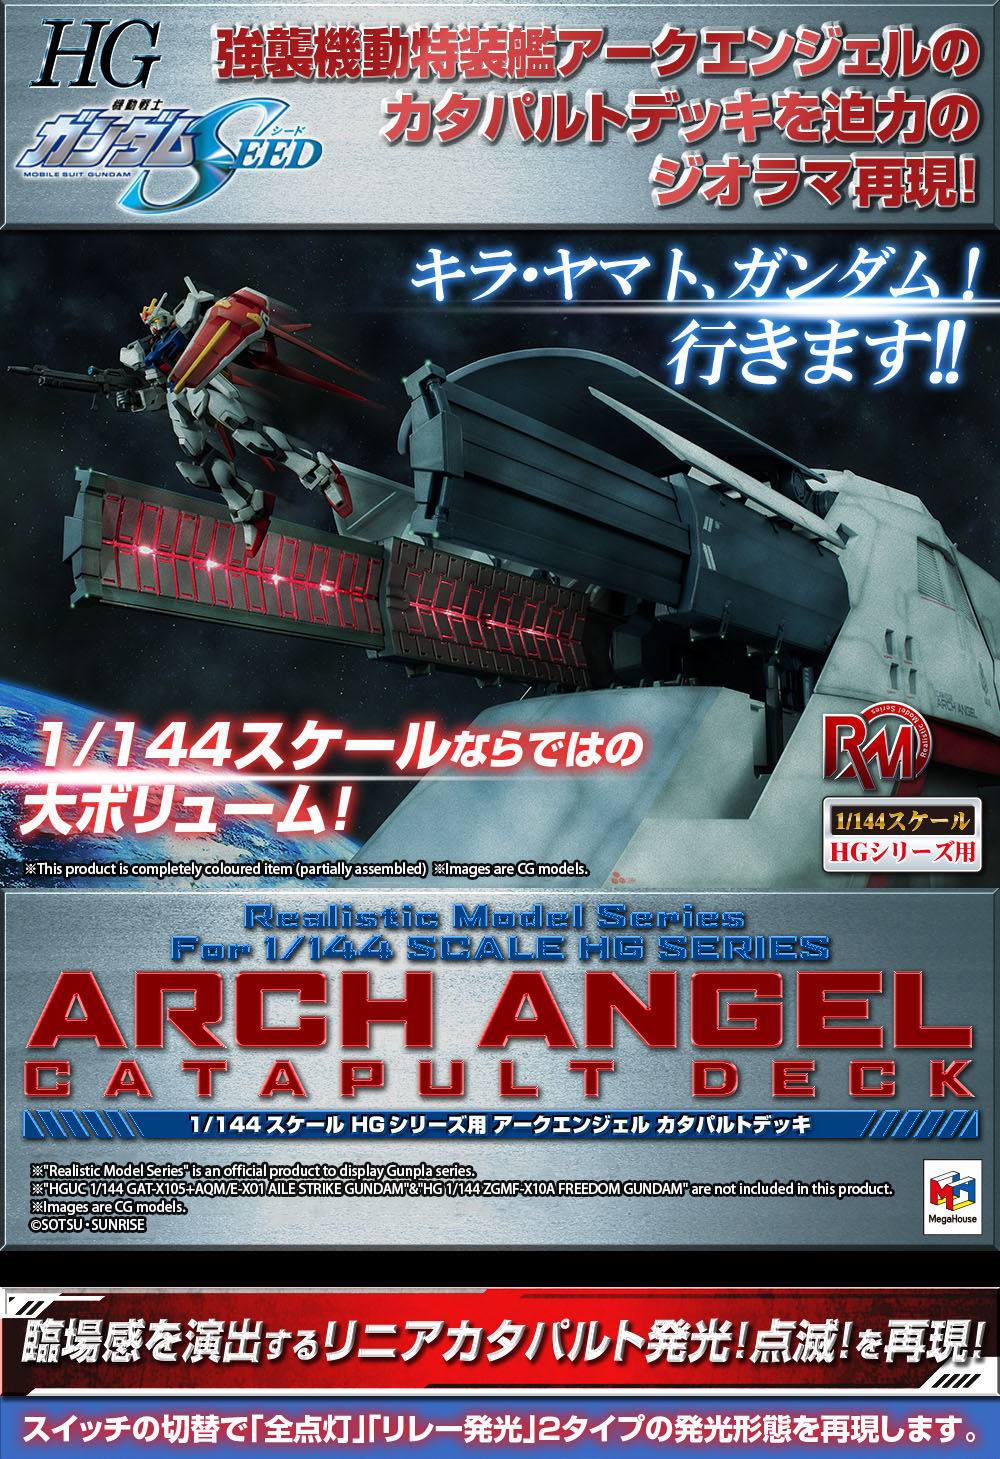 REALISTIC MODEL SERIES MOBILE SUIT GUNDAM SEED ARCHANGEL CATAPULT DECK FOR 1/144 HGUC